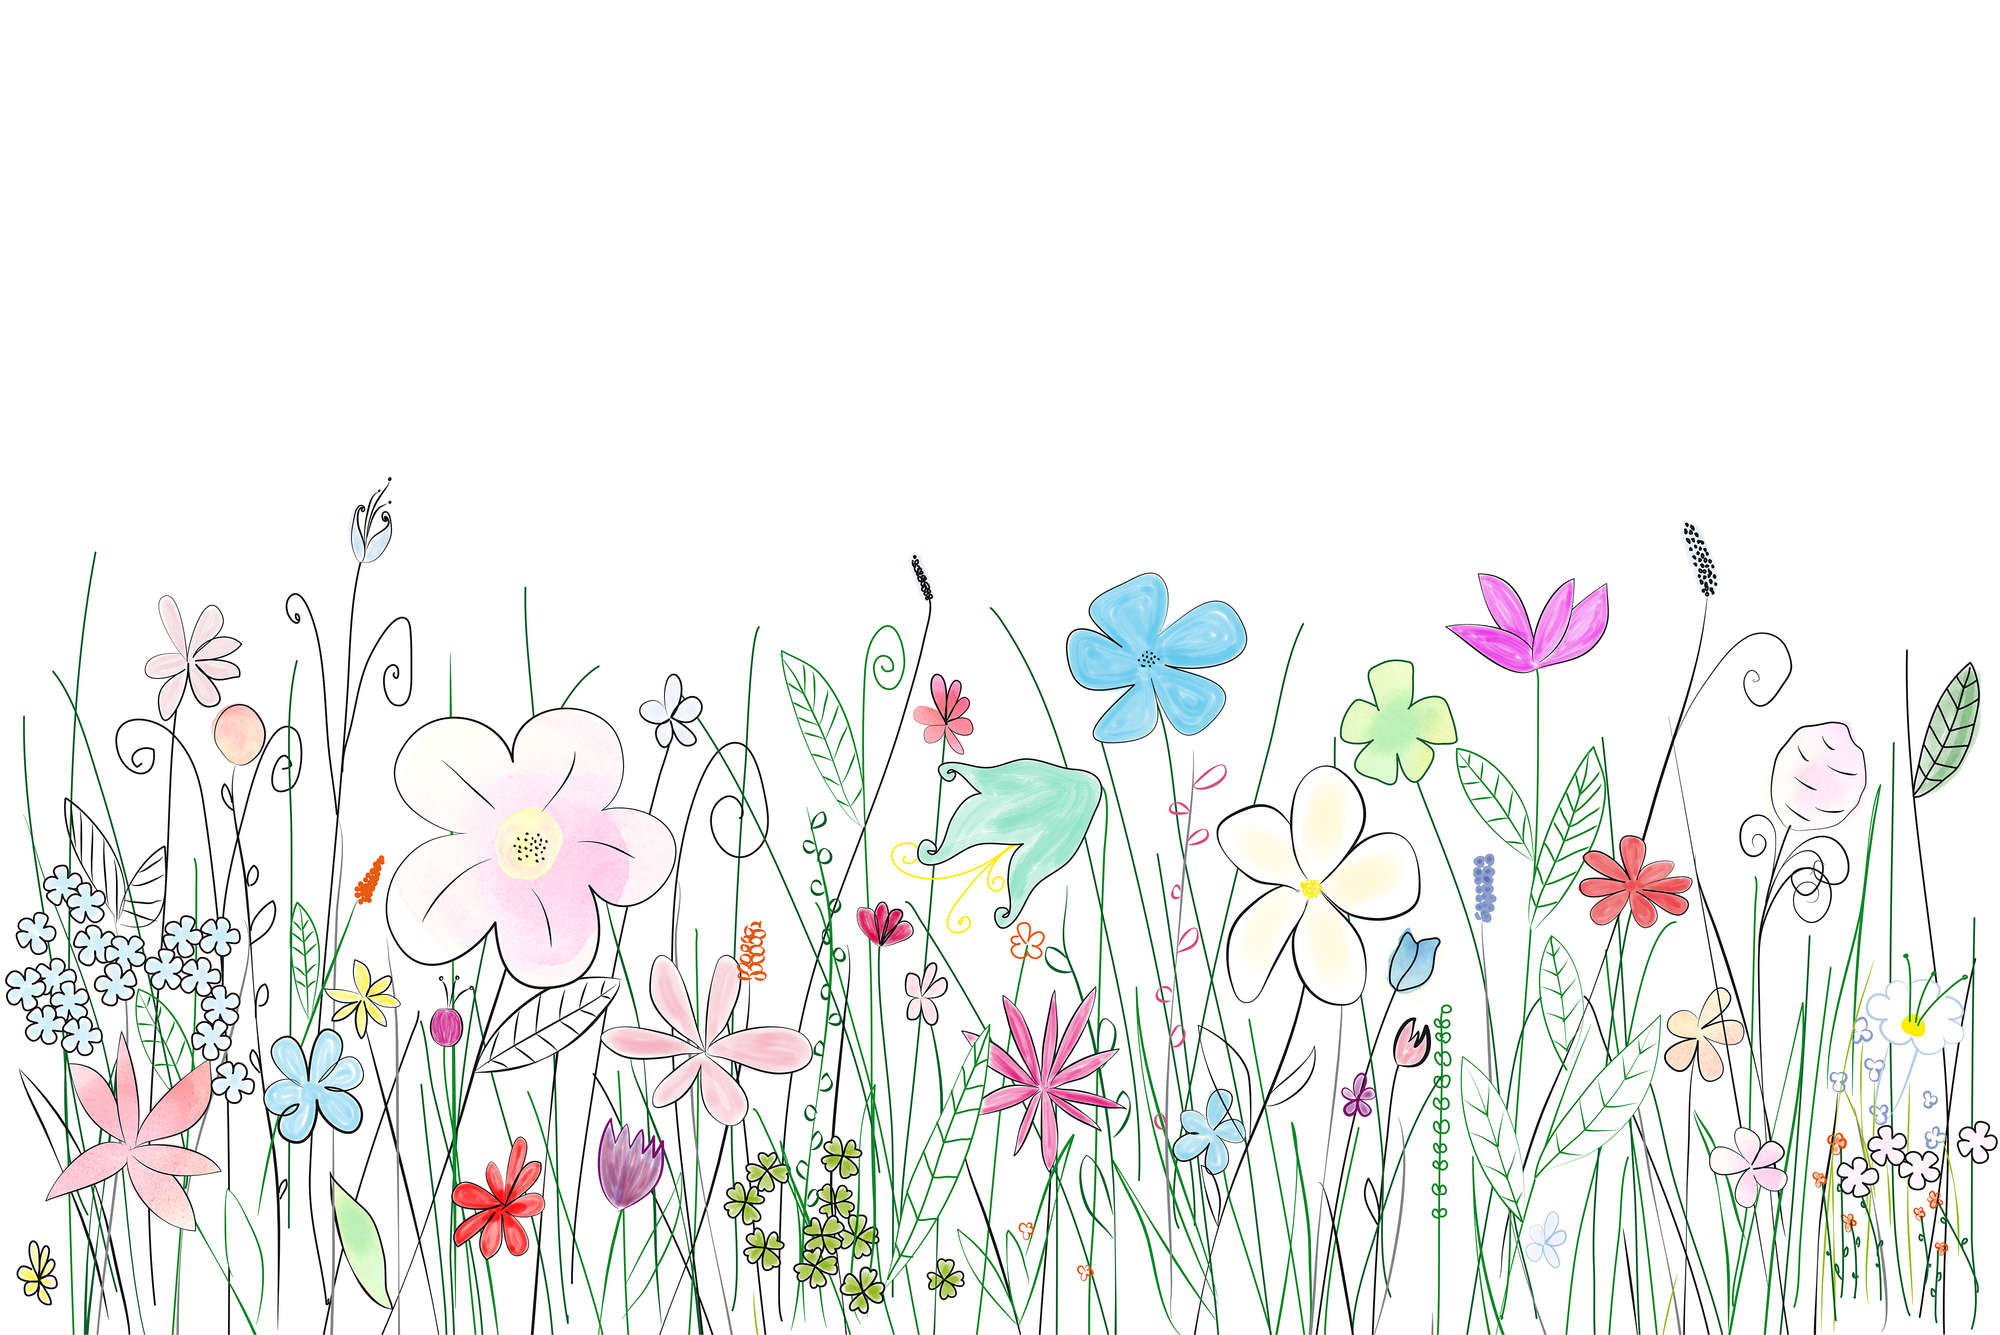             Children mural with colourful drawn flowers on matte smooth non-woven
        